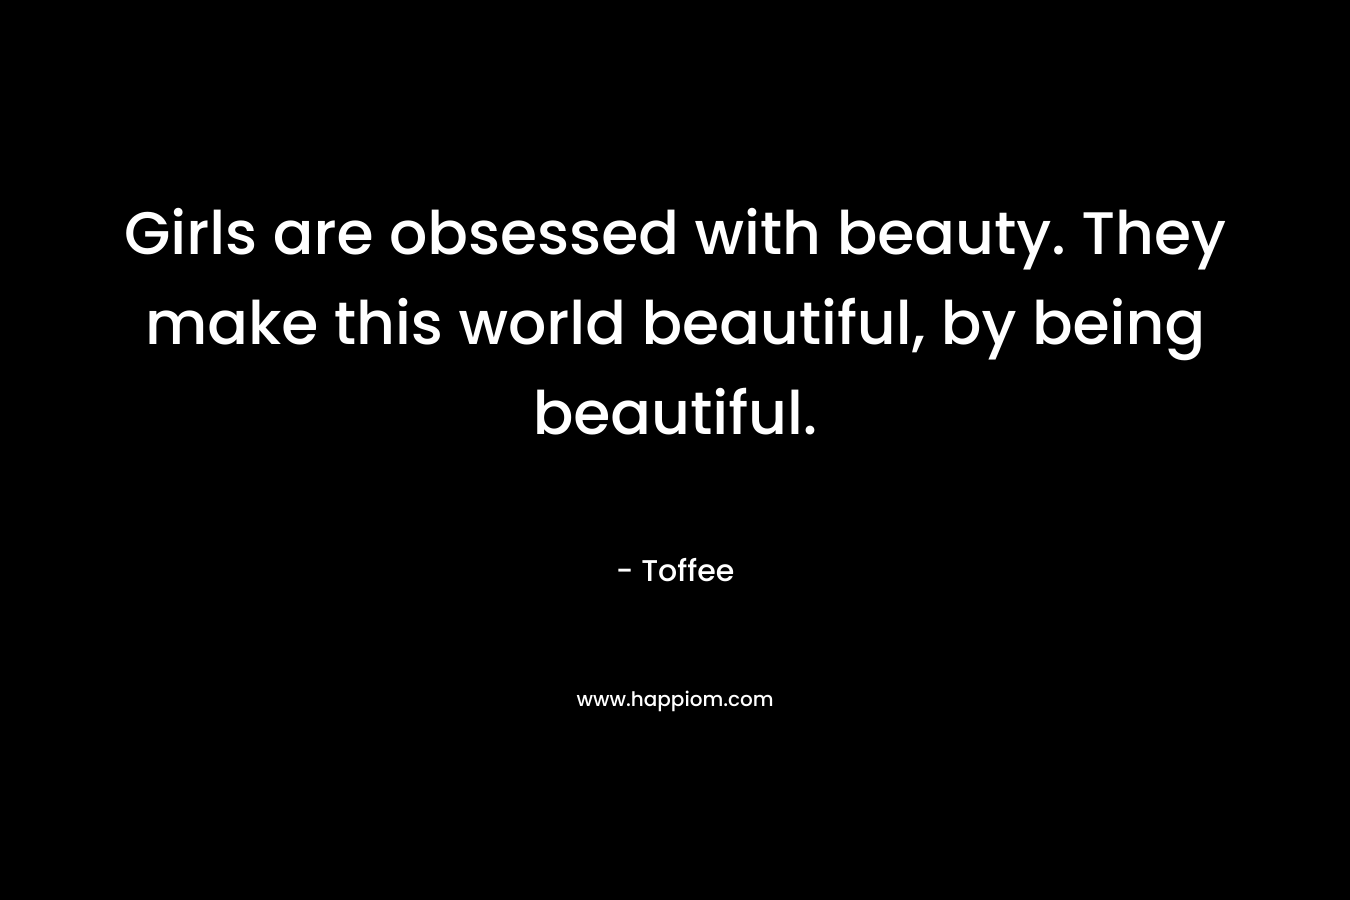 Girls are obsessed with beauty. They make this world beautiful, by being beautiful. – Toffee